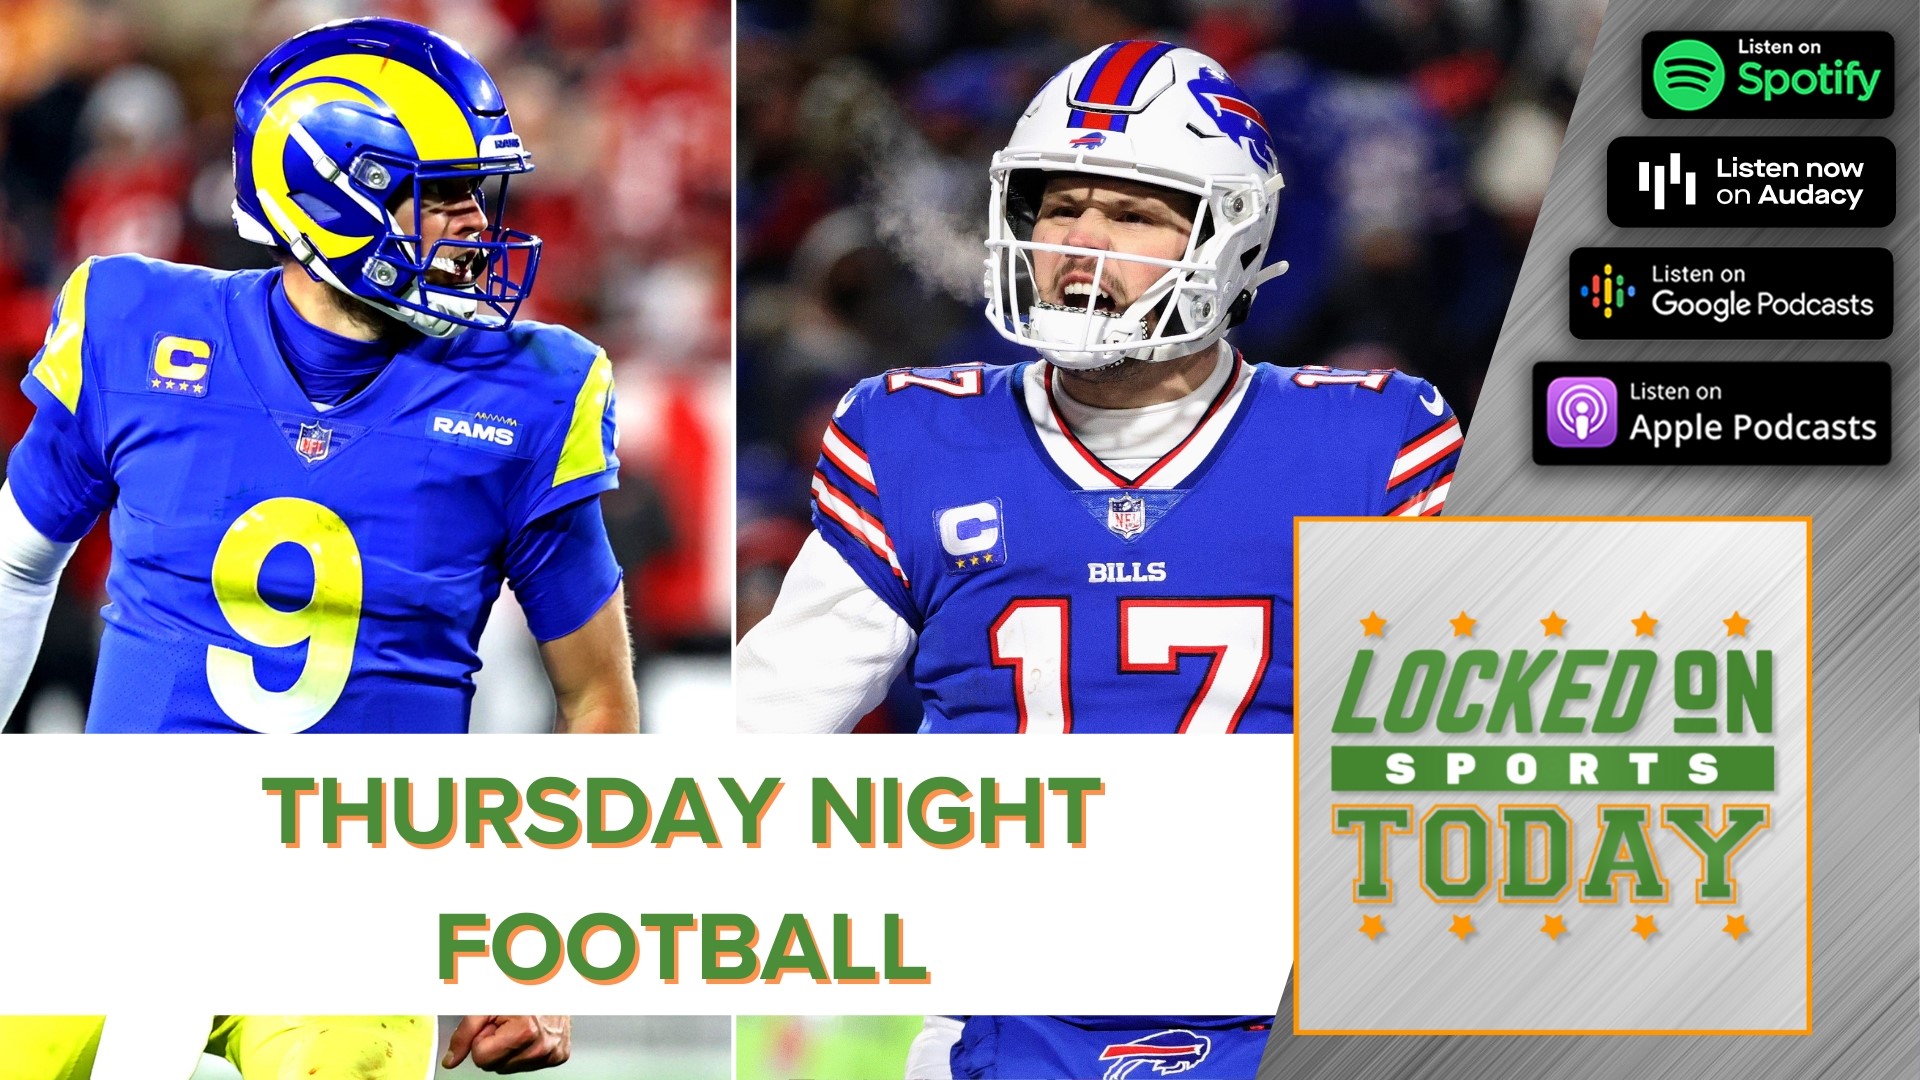 google who is playing thursday night football